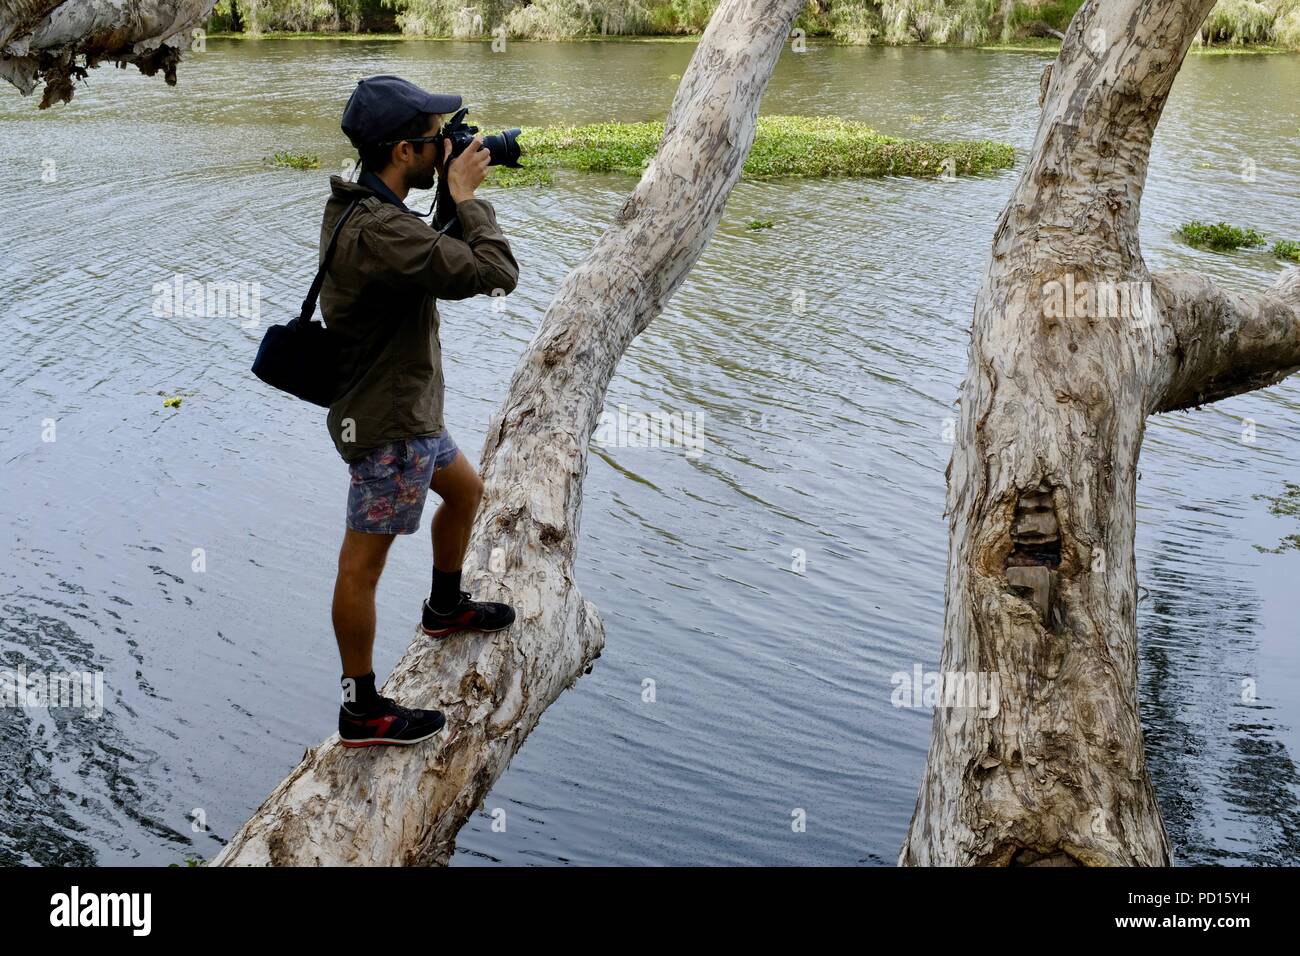 A man stands on a tree limb over a river while taking a photo, Booroona walking trail on the Ross River, Rasmussen QLD 4815, Australia Stock Photo